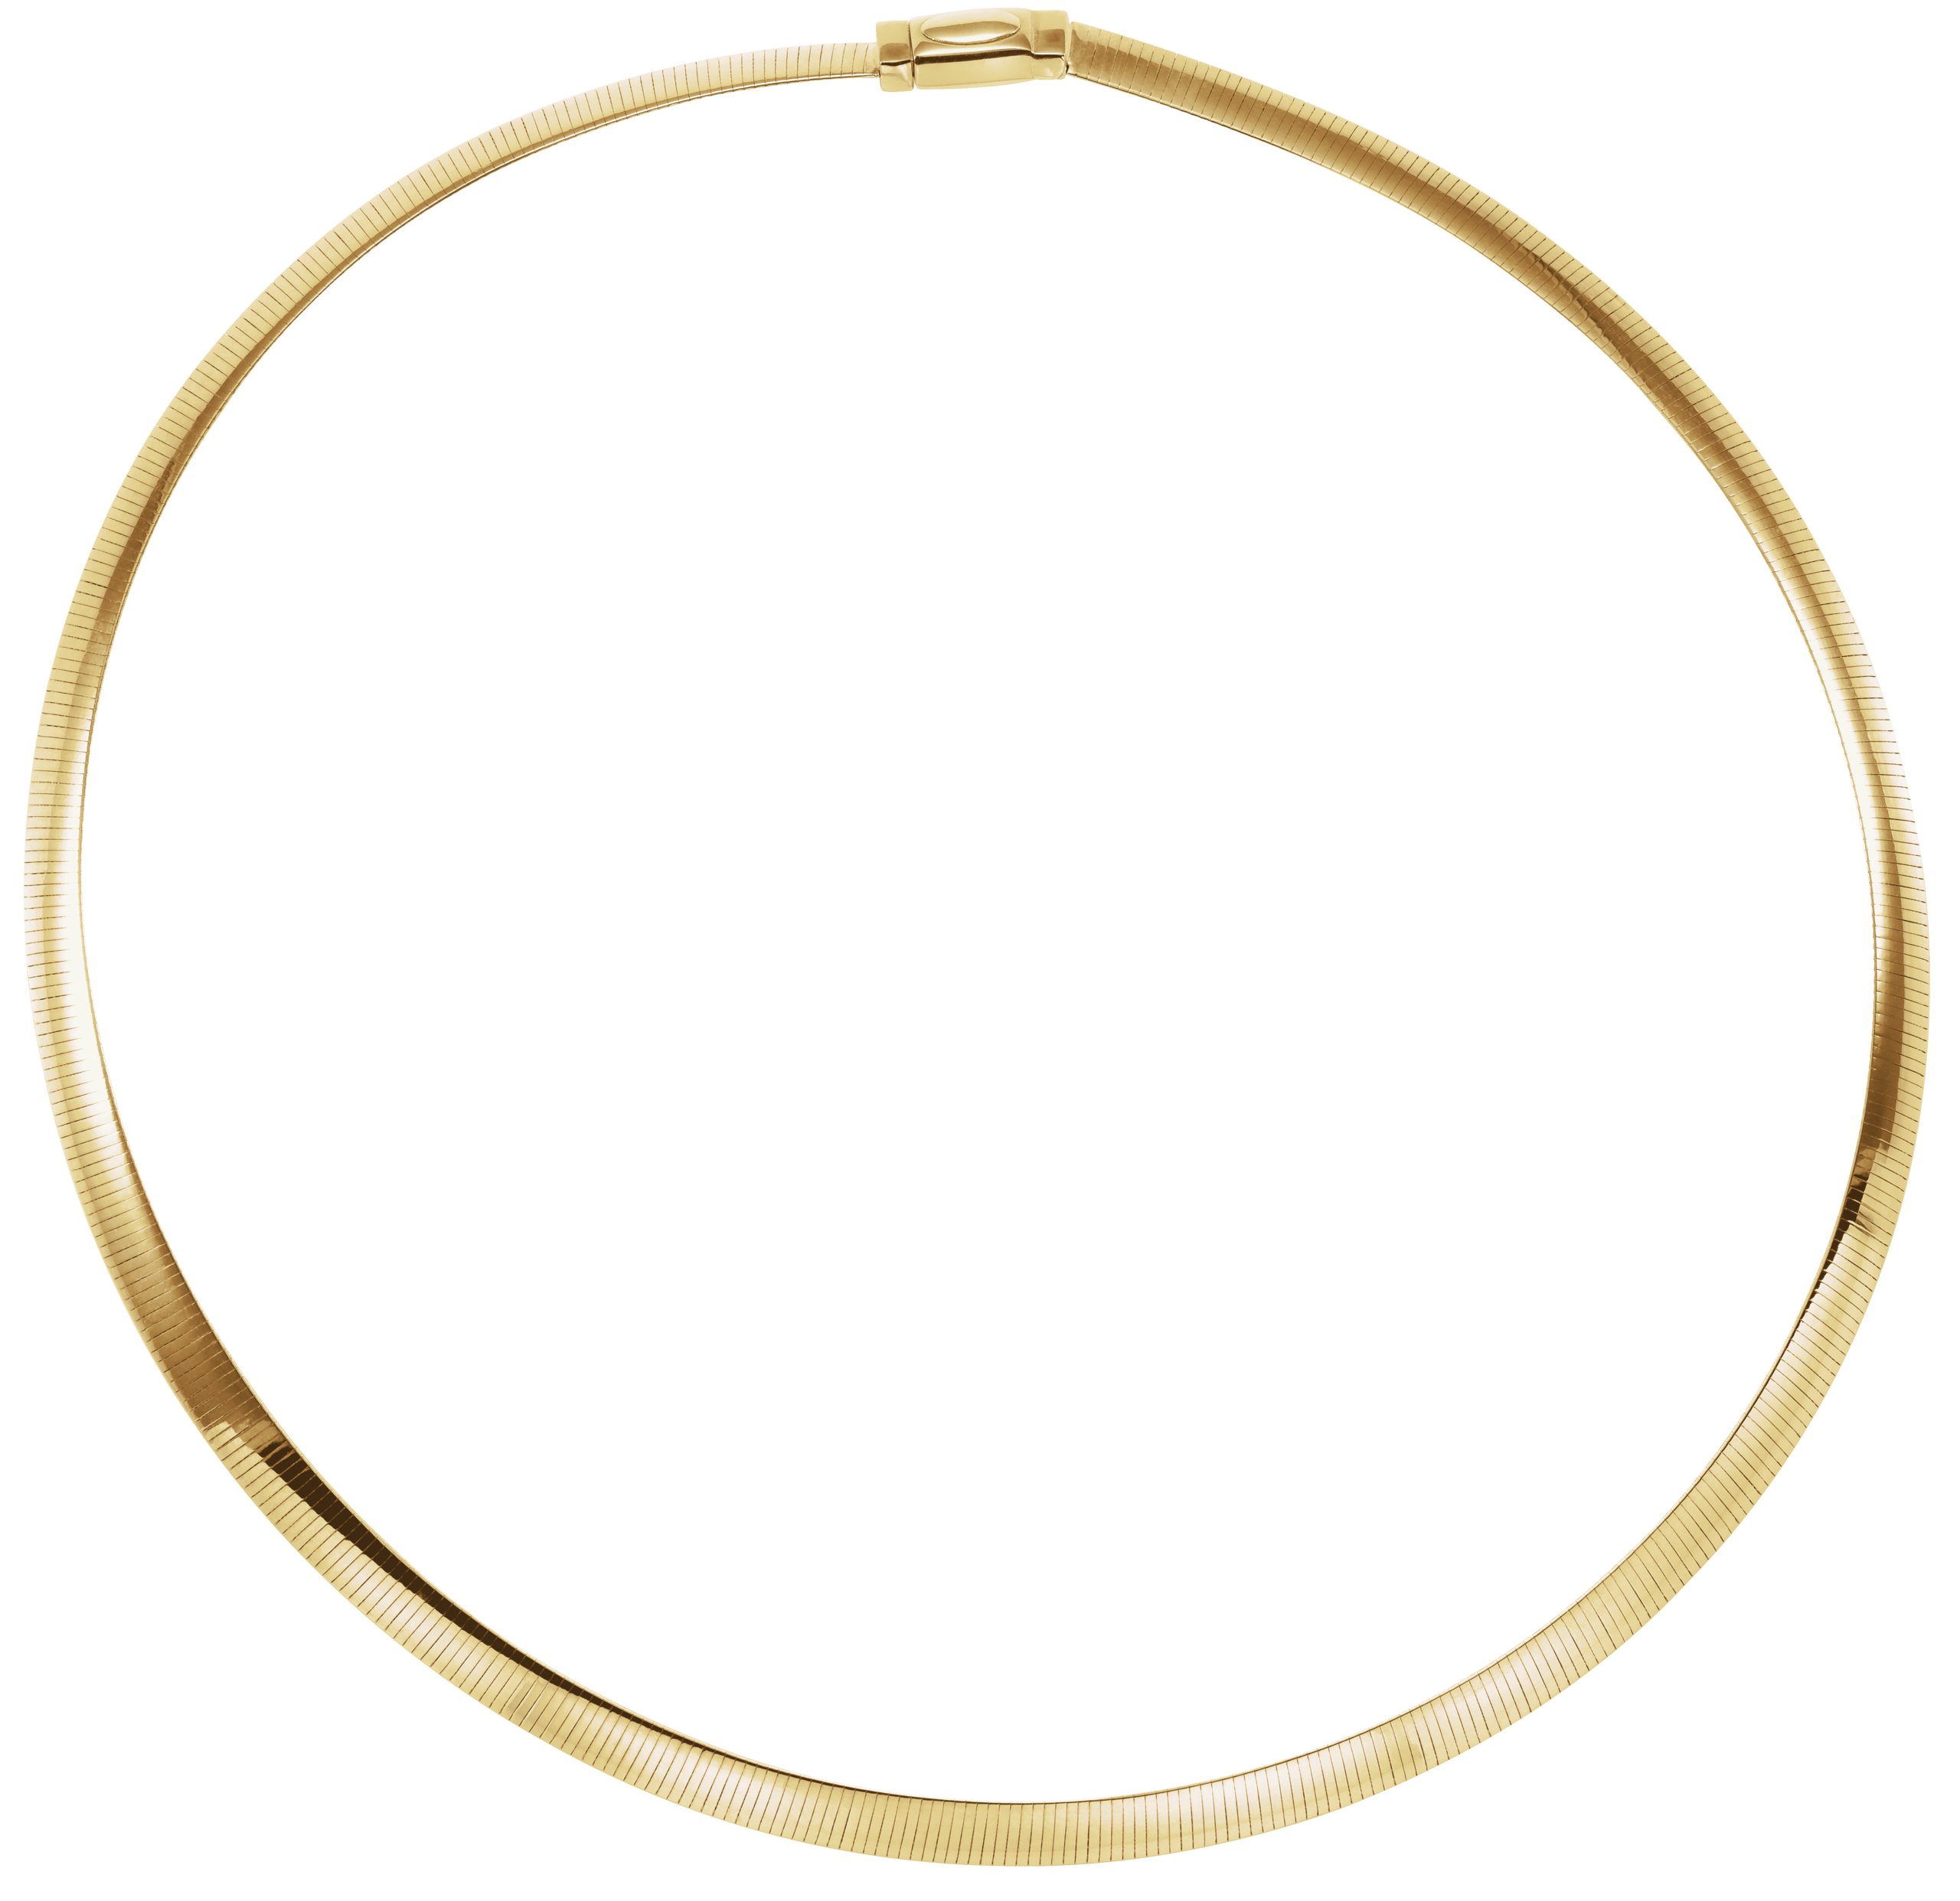 14K Yellow/White 6 mm Two-Tone Reversible Omega 16" Chain